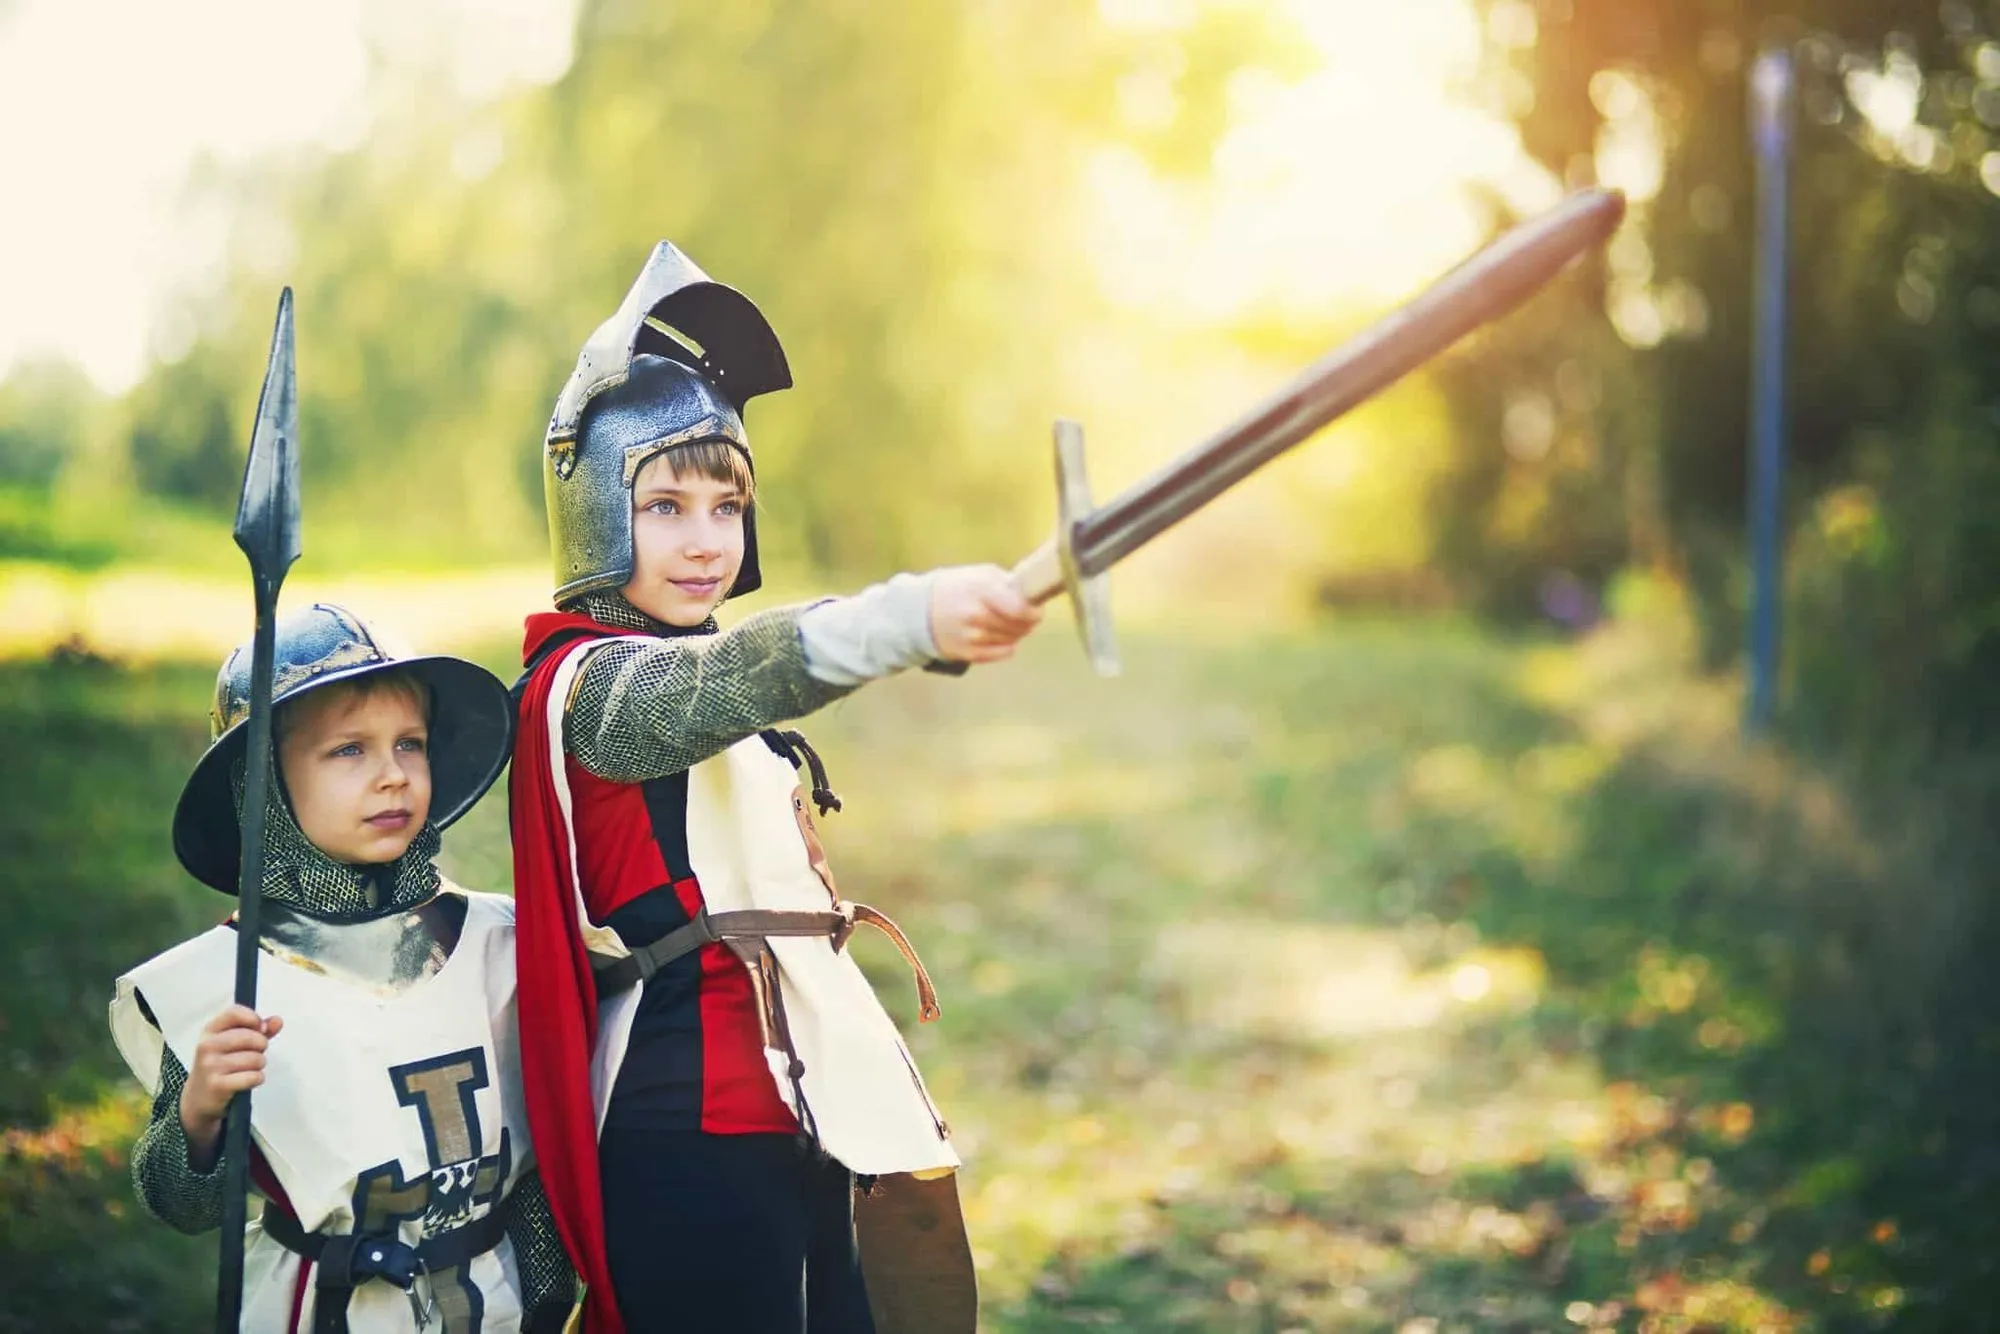 Two children dressed up as knights.